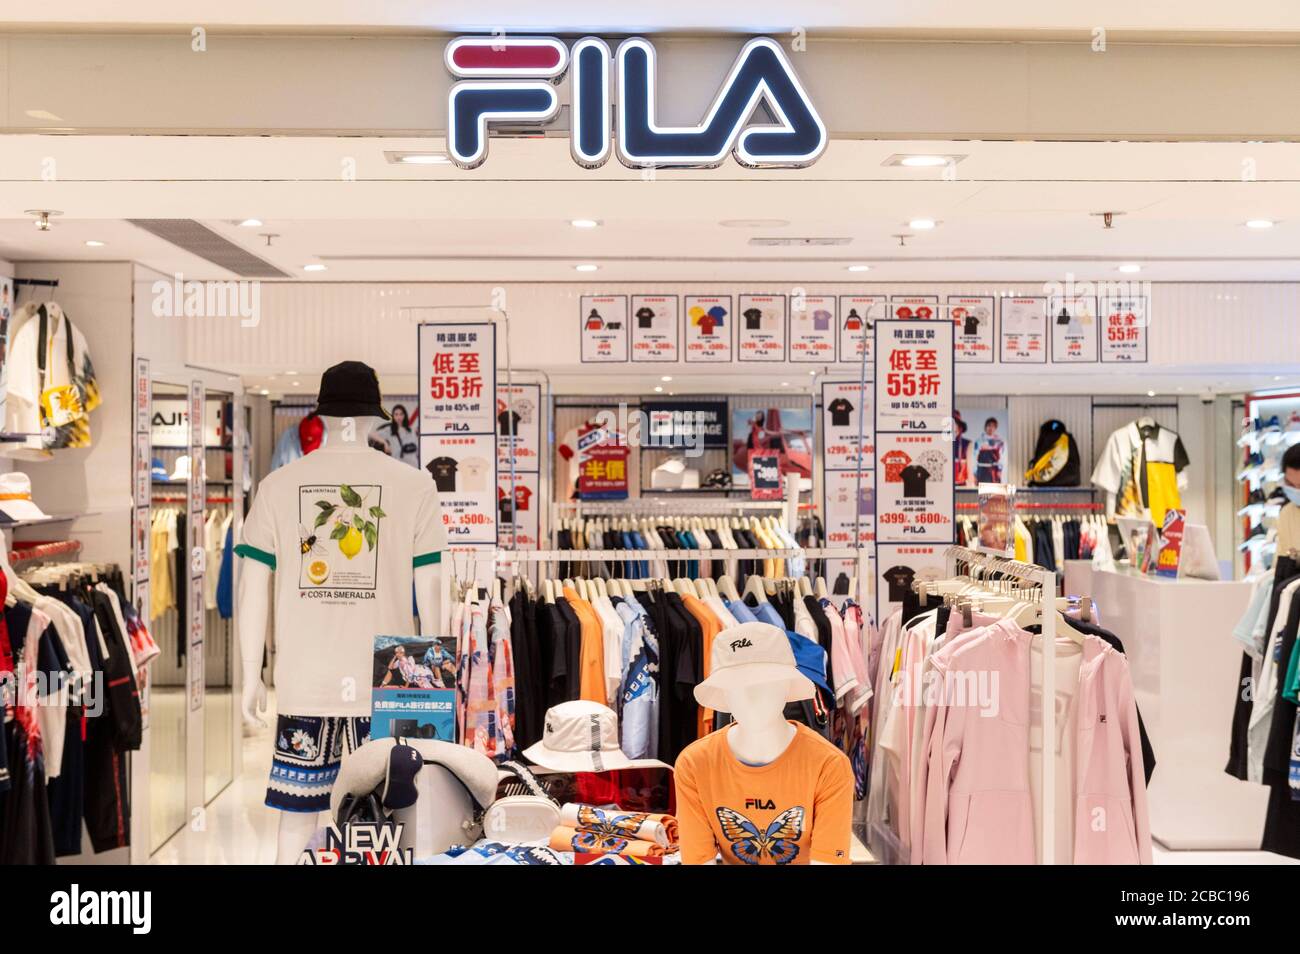 Fila High Resolution Stock Photography Images - Alamy